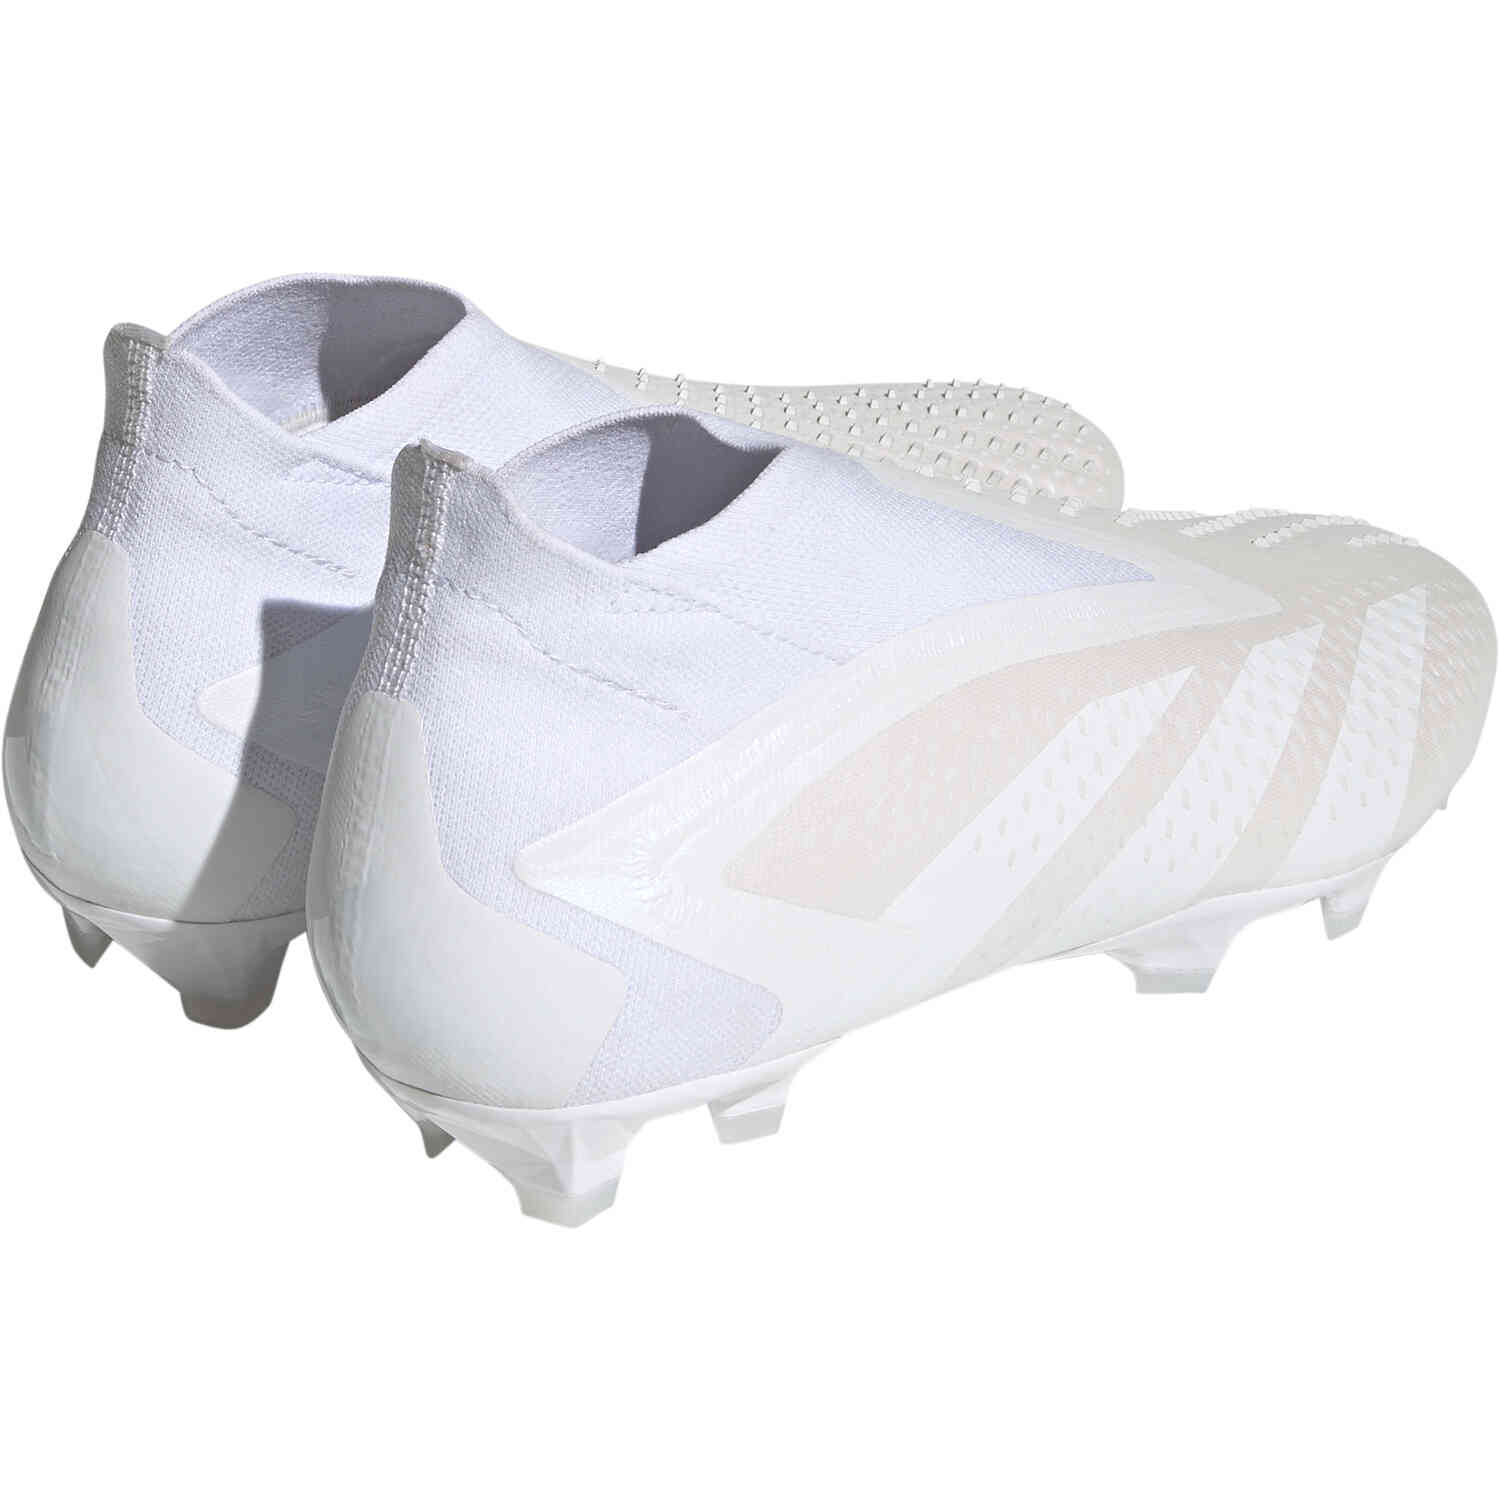 adidas Predator Accuracy+ FG Firm Ground Soccer Cleats - White - Soccer